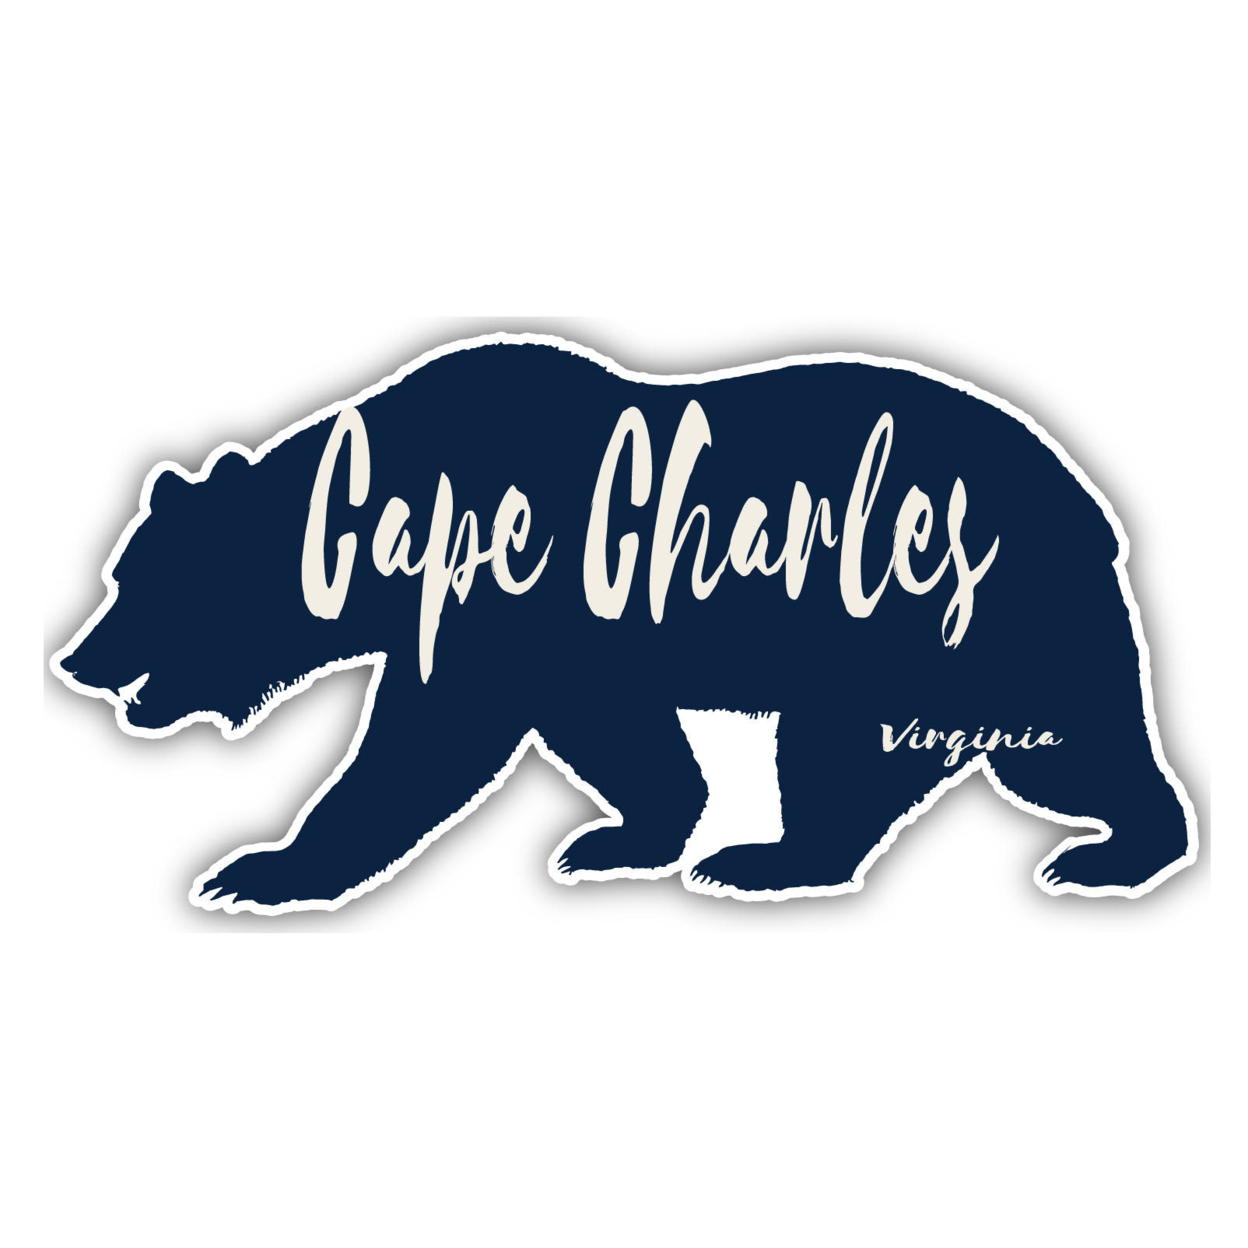 Cape Charles Virginia Souvenir Decorative Stickers (Choose Theme And Size) - 4-Pack, 2-Inch, Bear